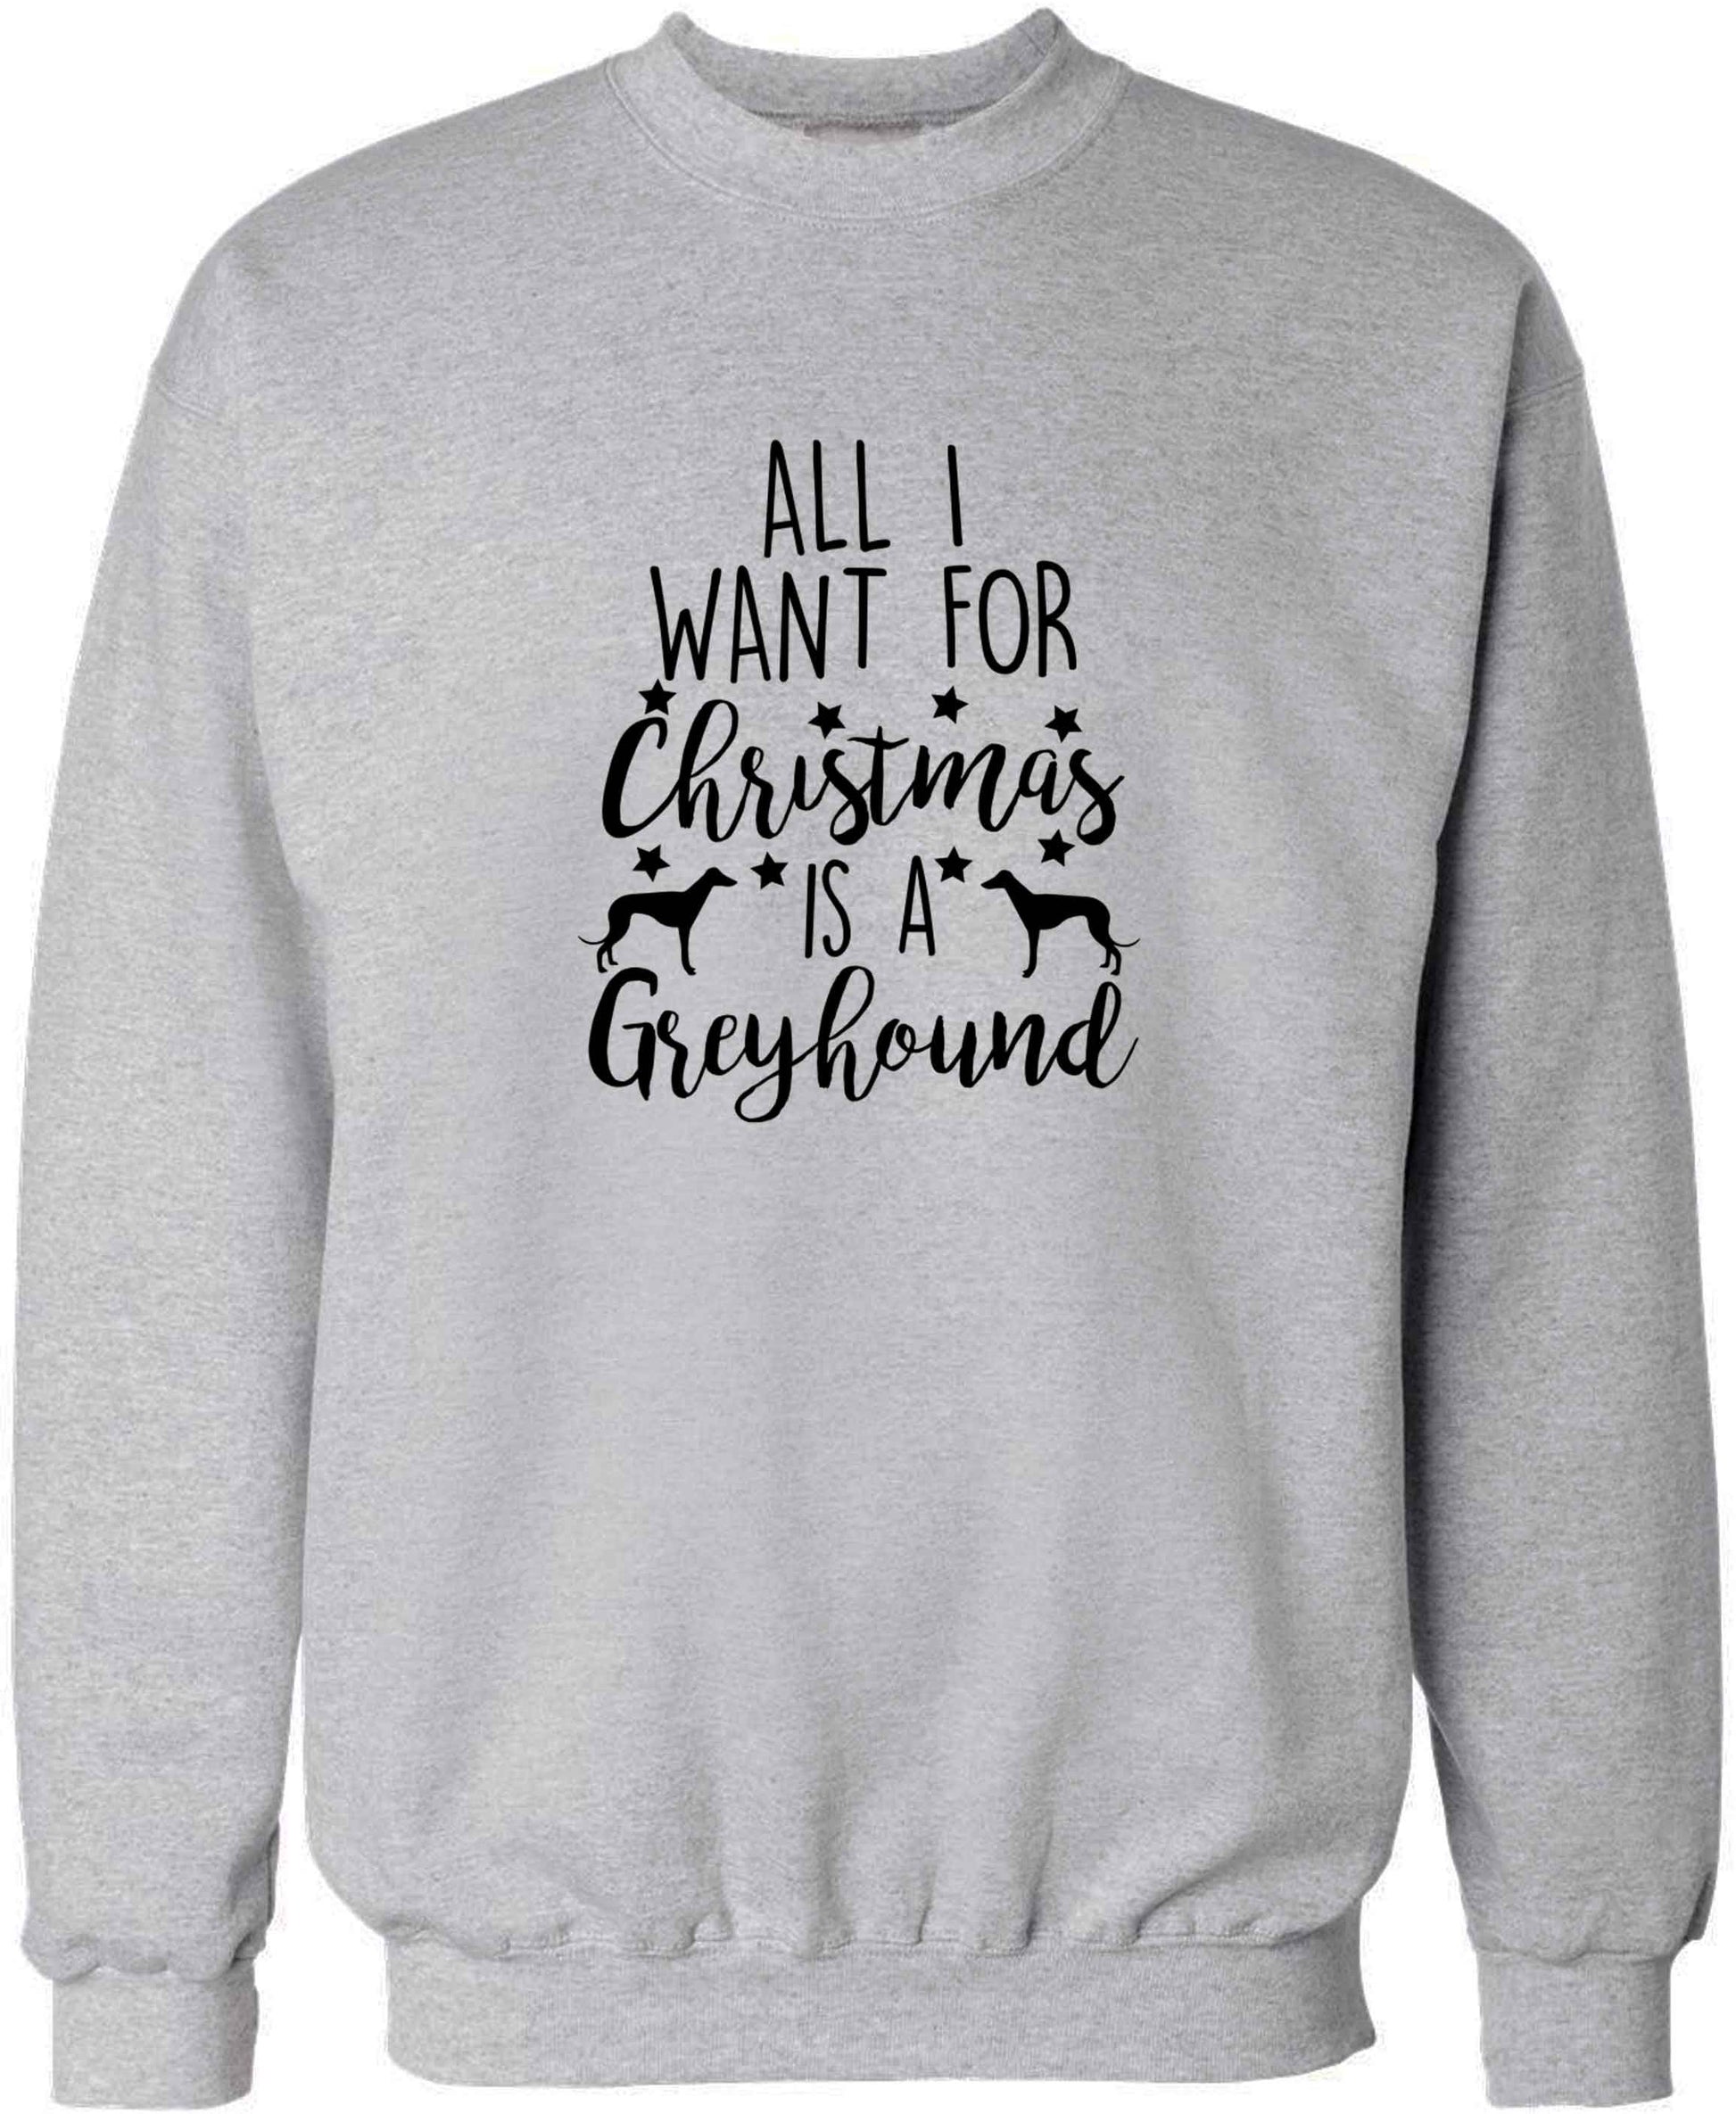 All I want for Christmas is a greyhound adult's unisex grey sweater 2XL